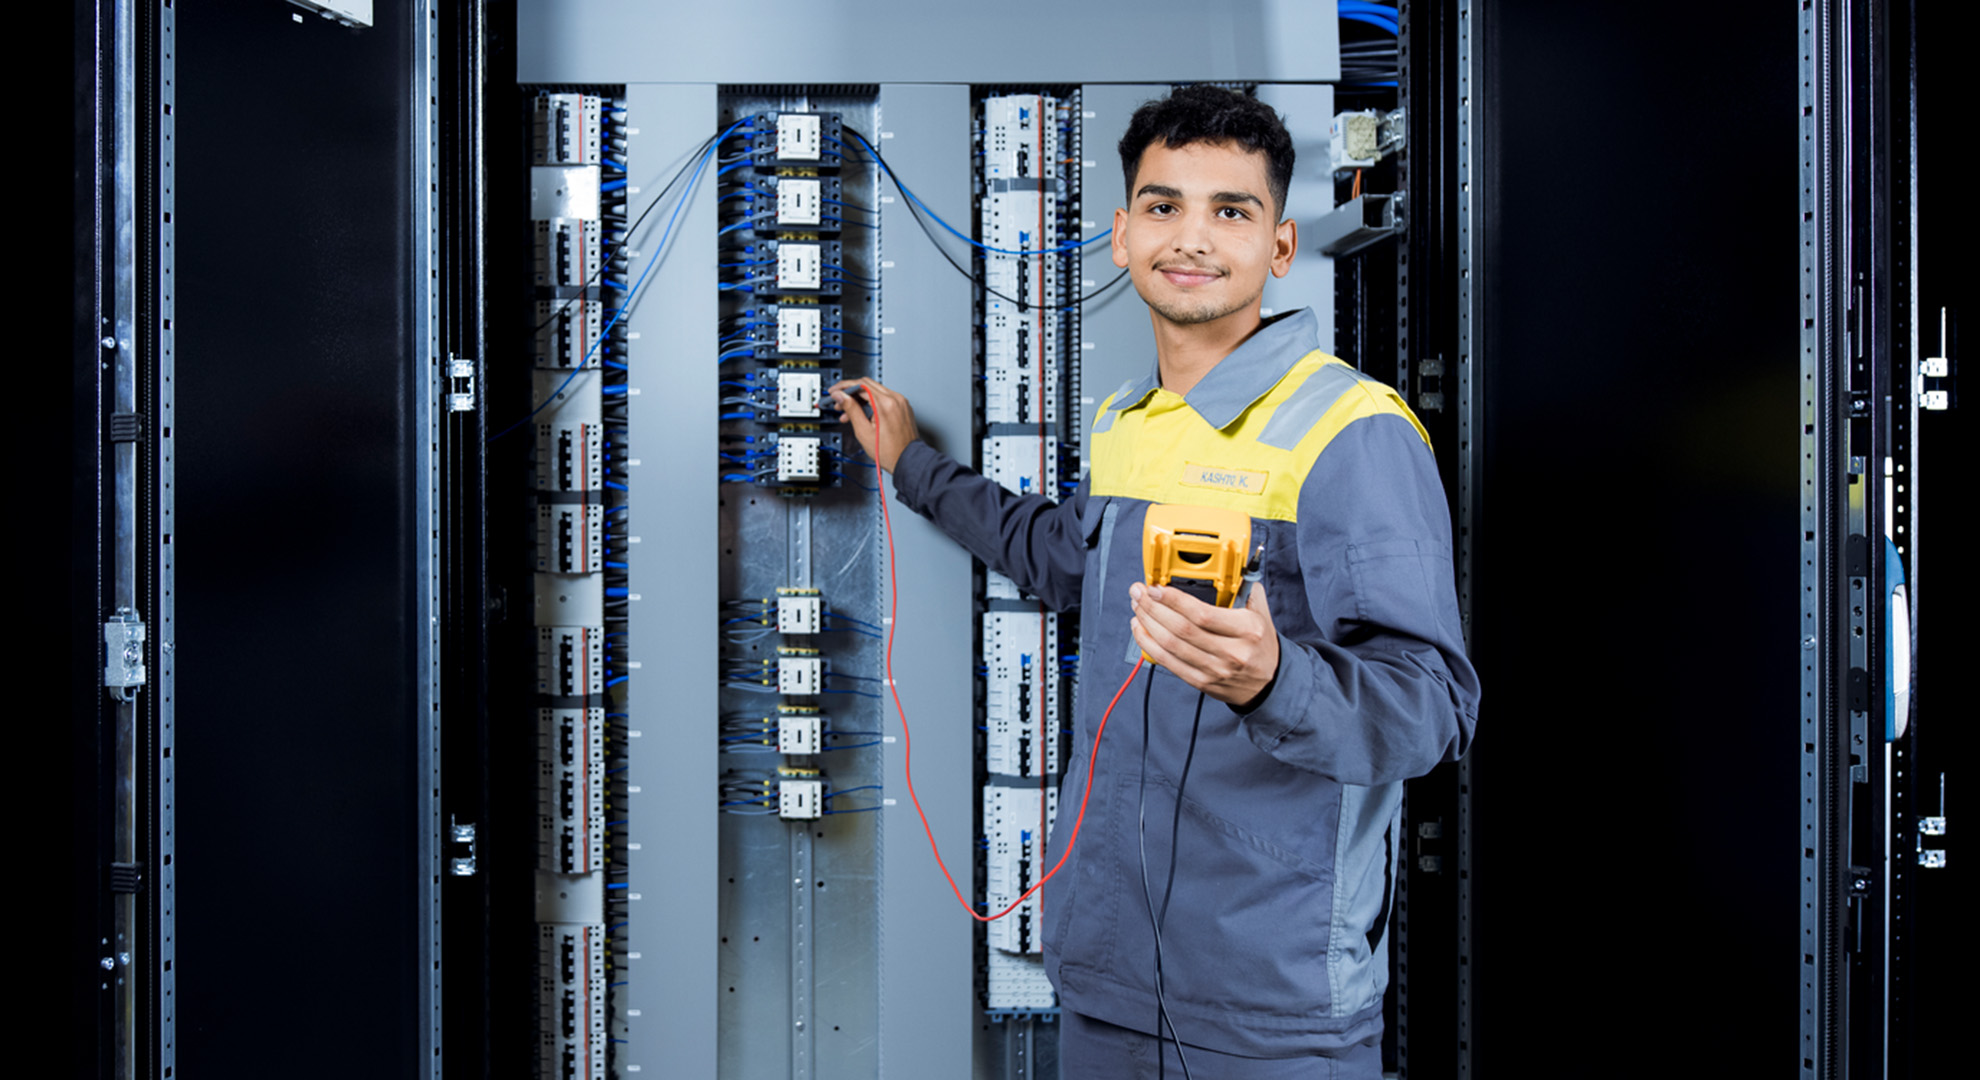 A mechatronic apprentice stands at a switch cabinet and smiles at the camera.